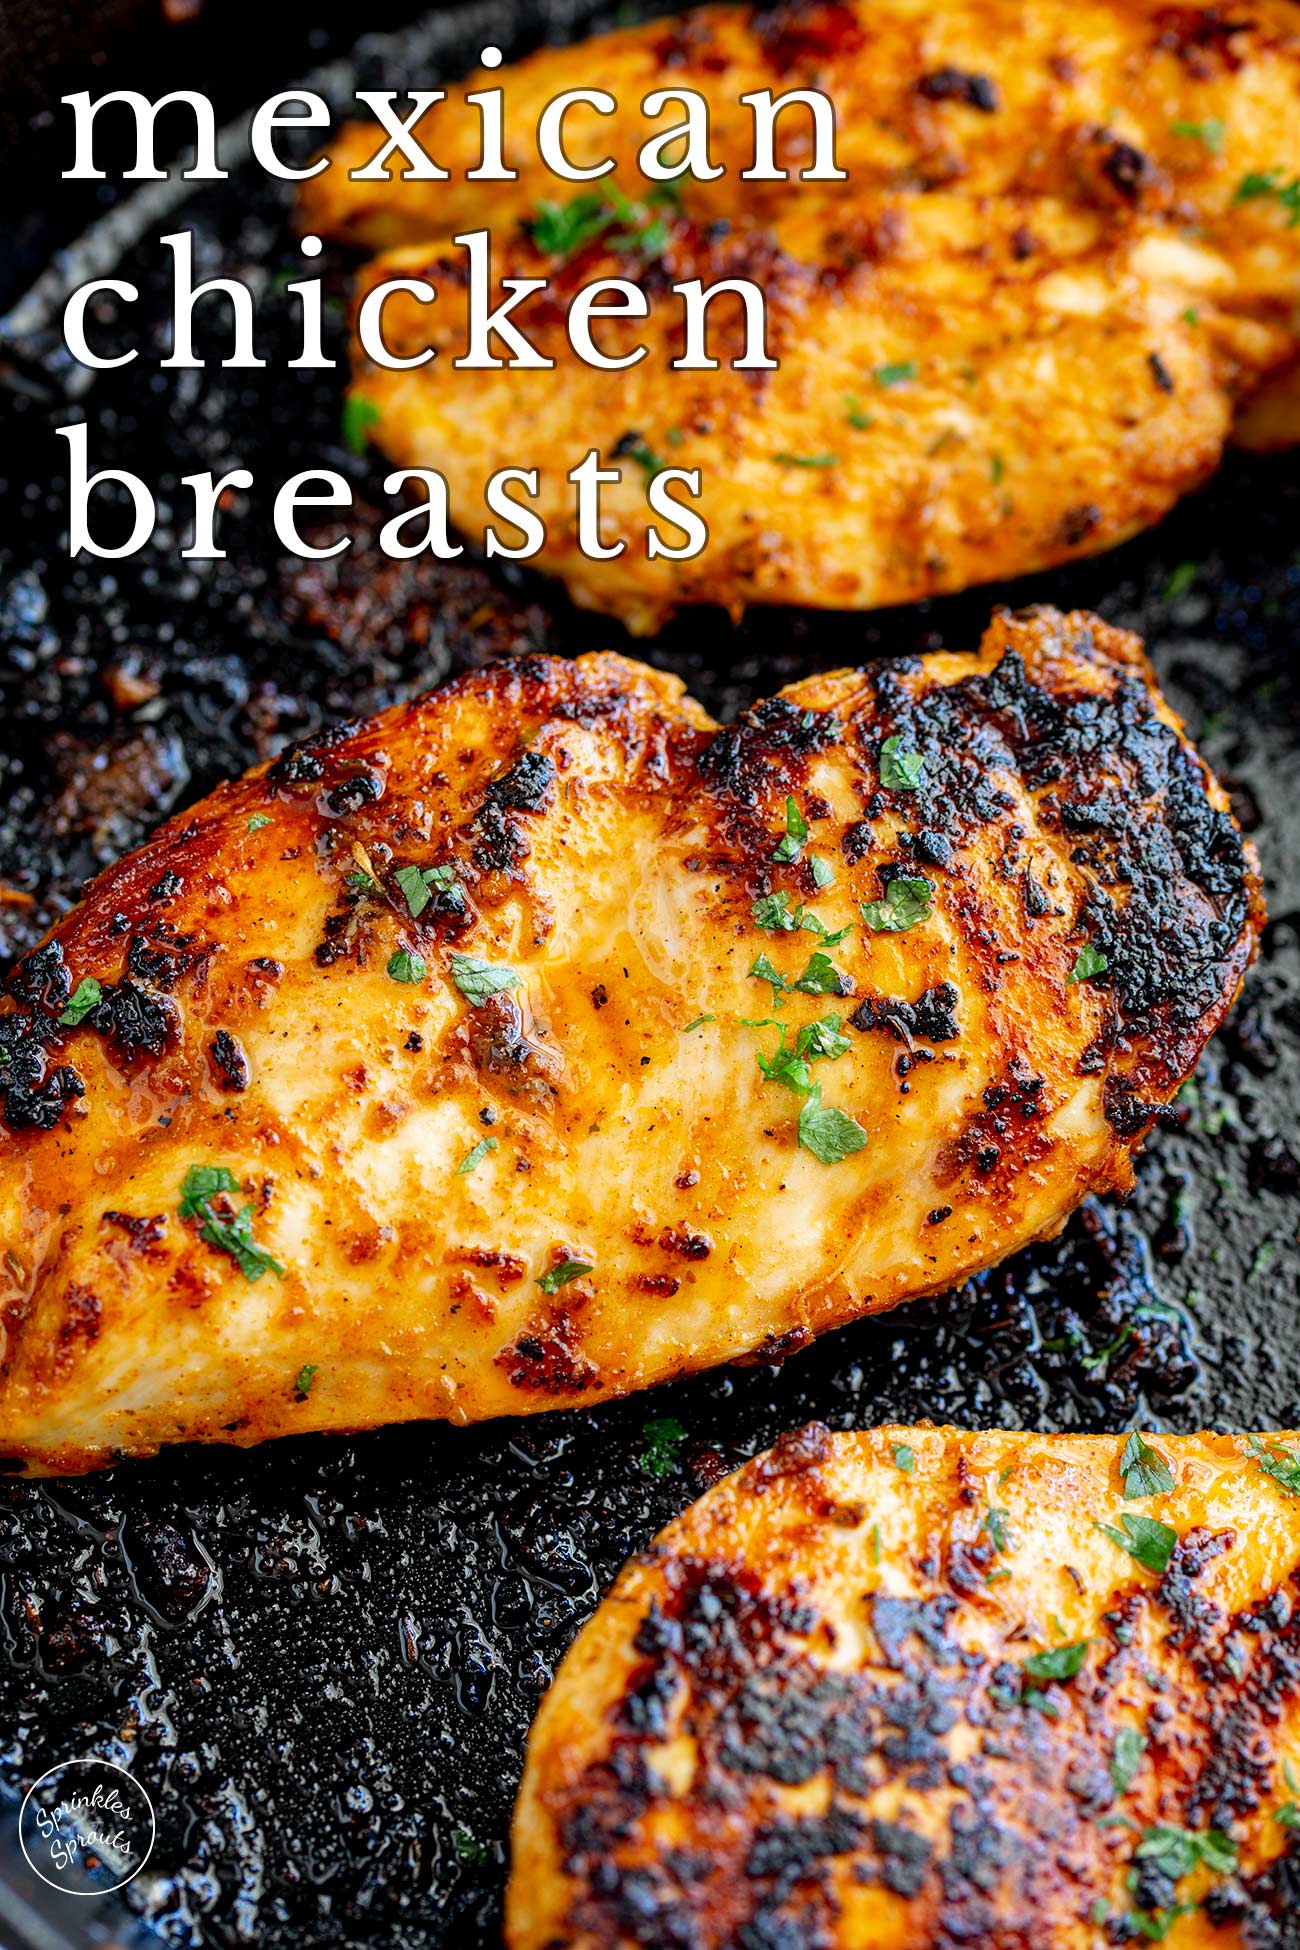 pin image: cooked chicken breasts with seasoning on them with text overlaid